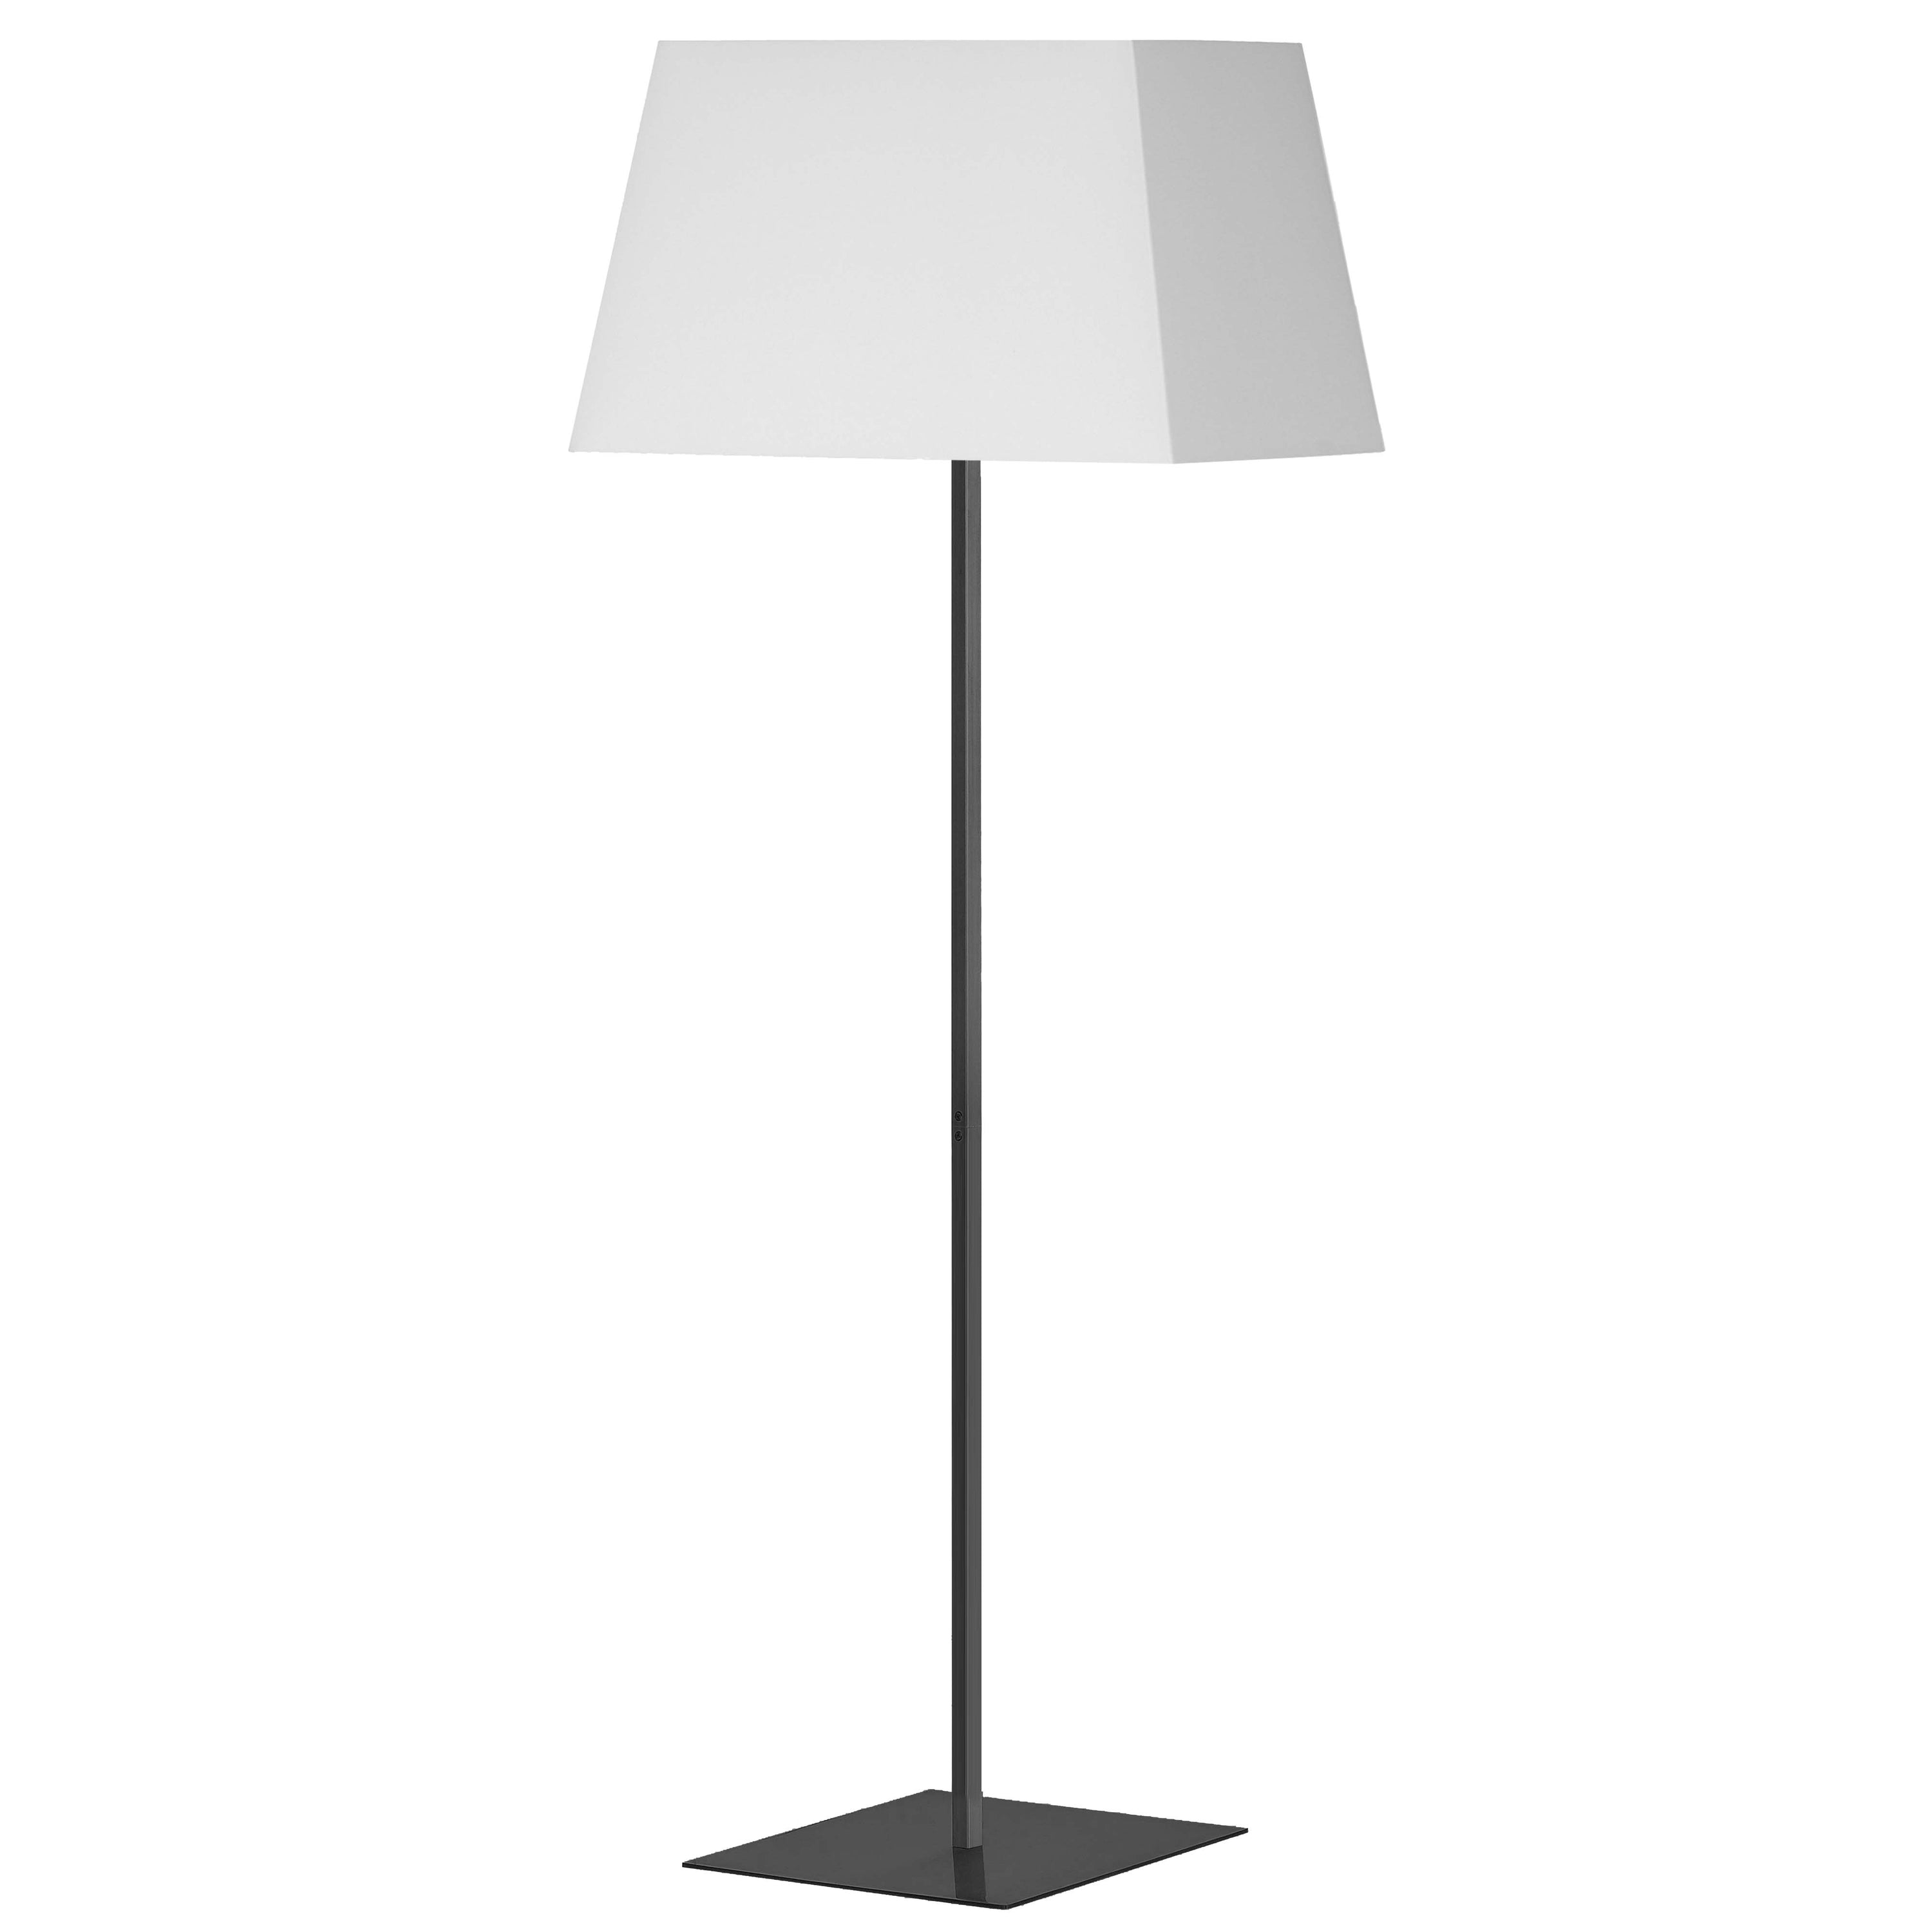 Dainolite GTC-S631F-MB-WH 1 Light Incandescent Square Base Floor Lamp Matte Black with White Shade